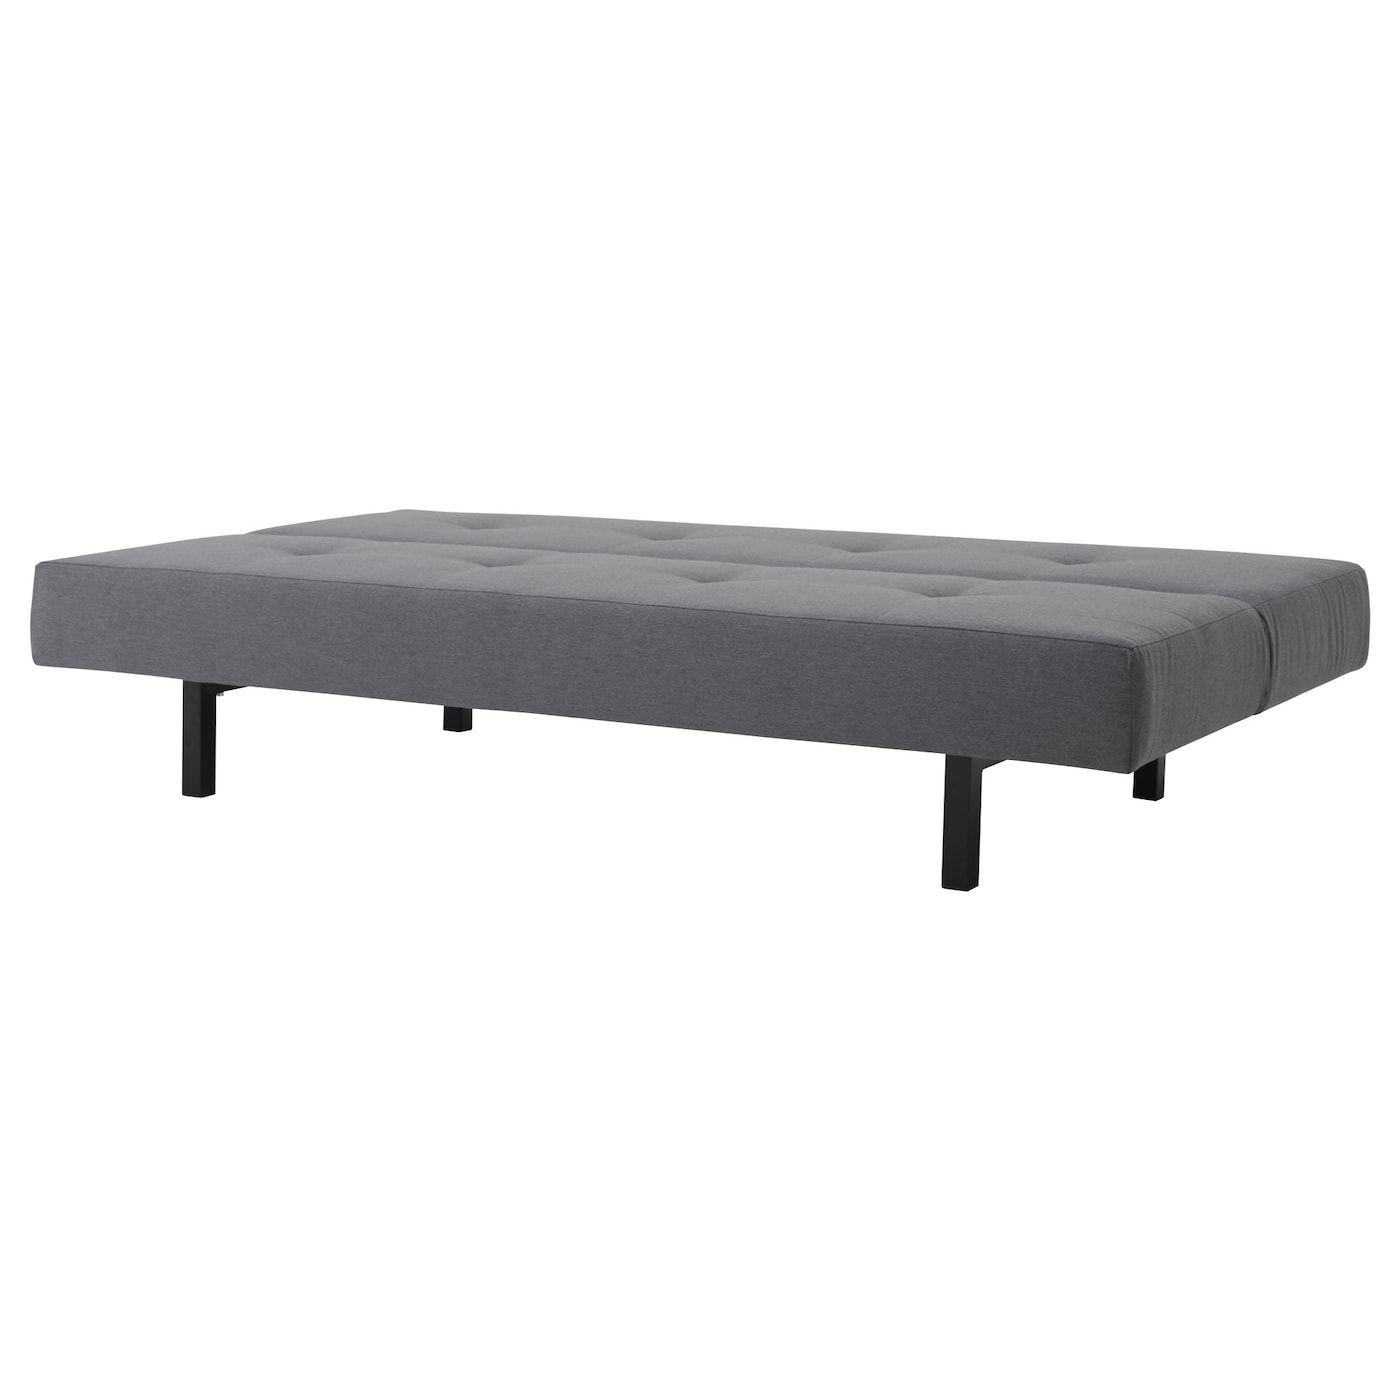 Grey-fold-down-sofa-bed-from-IKEA-29316